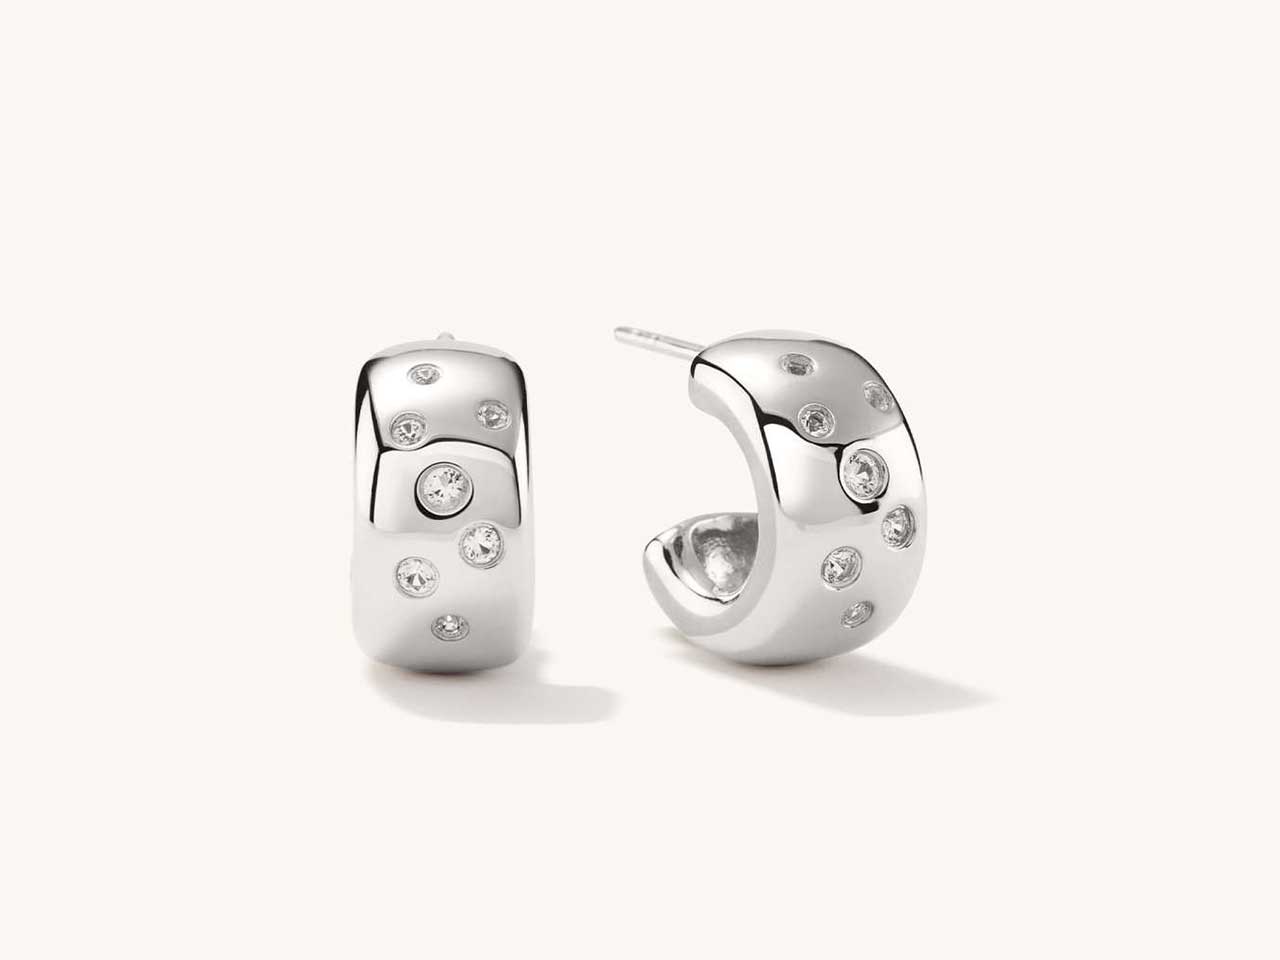 A silver jewellery pair of earrings from Canadian brand Mejuri.